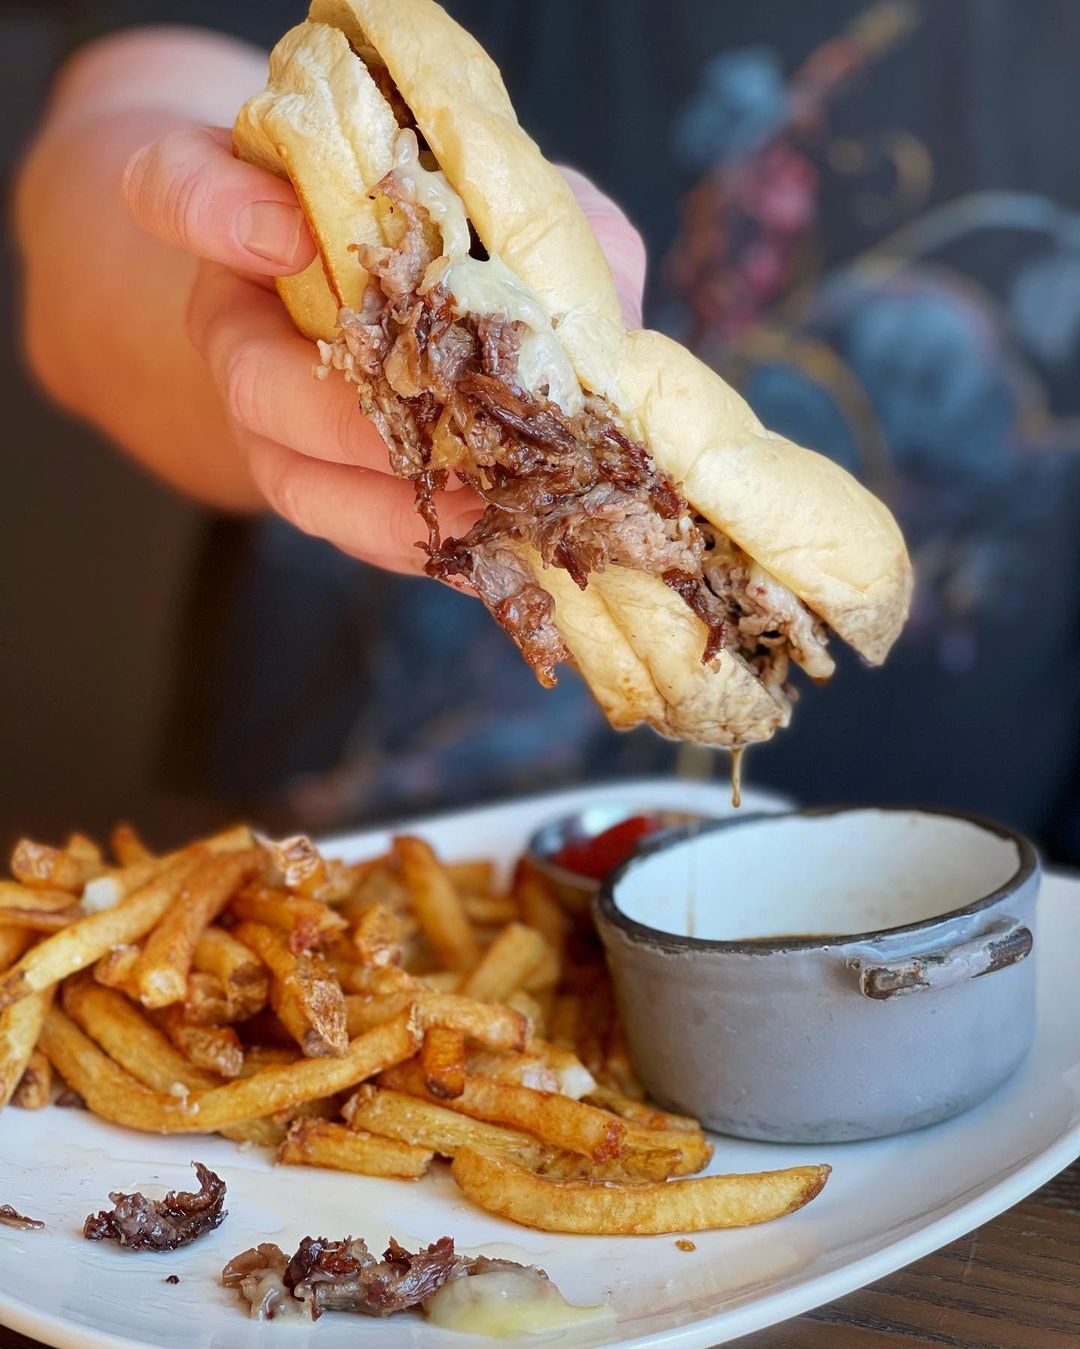 Shaved Ribeye Sandwich and French Fries at Earnest Bar & Hideaway in Nashville, TN